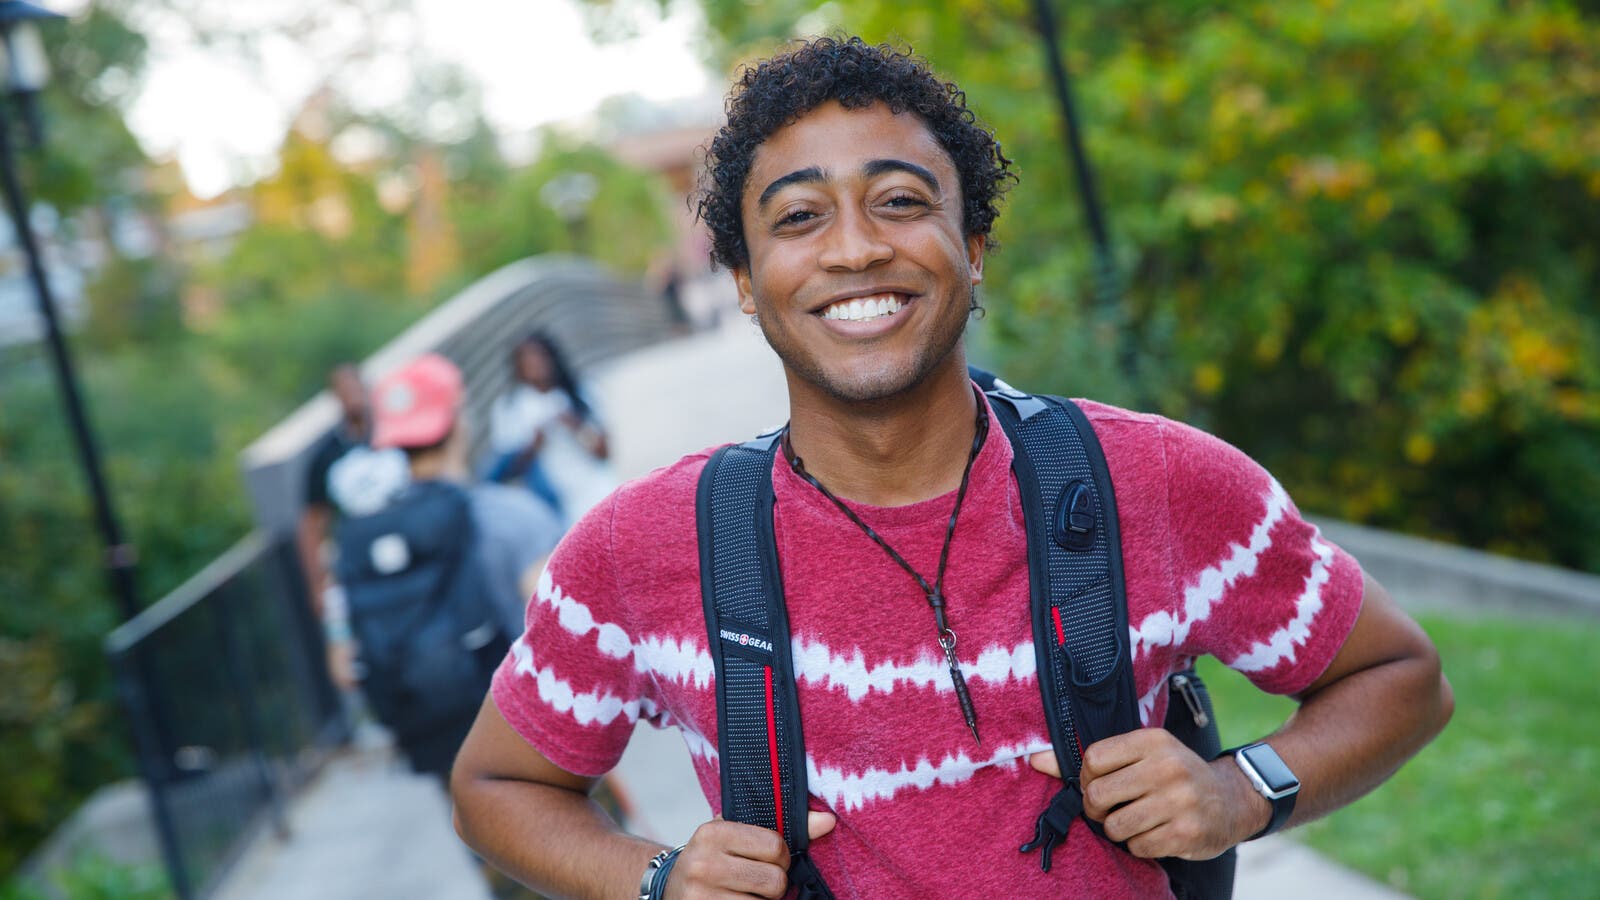 Student smiling and walking with backpack on